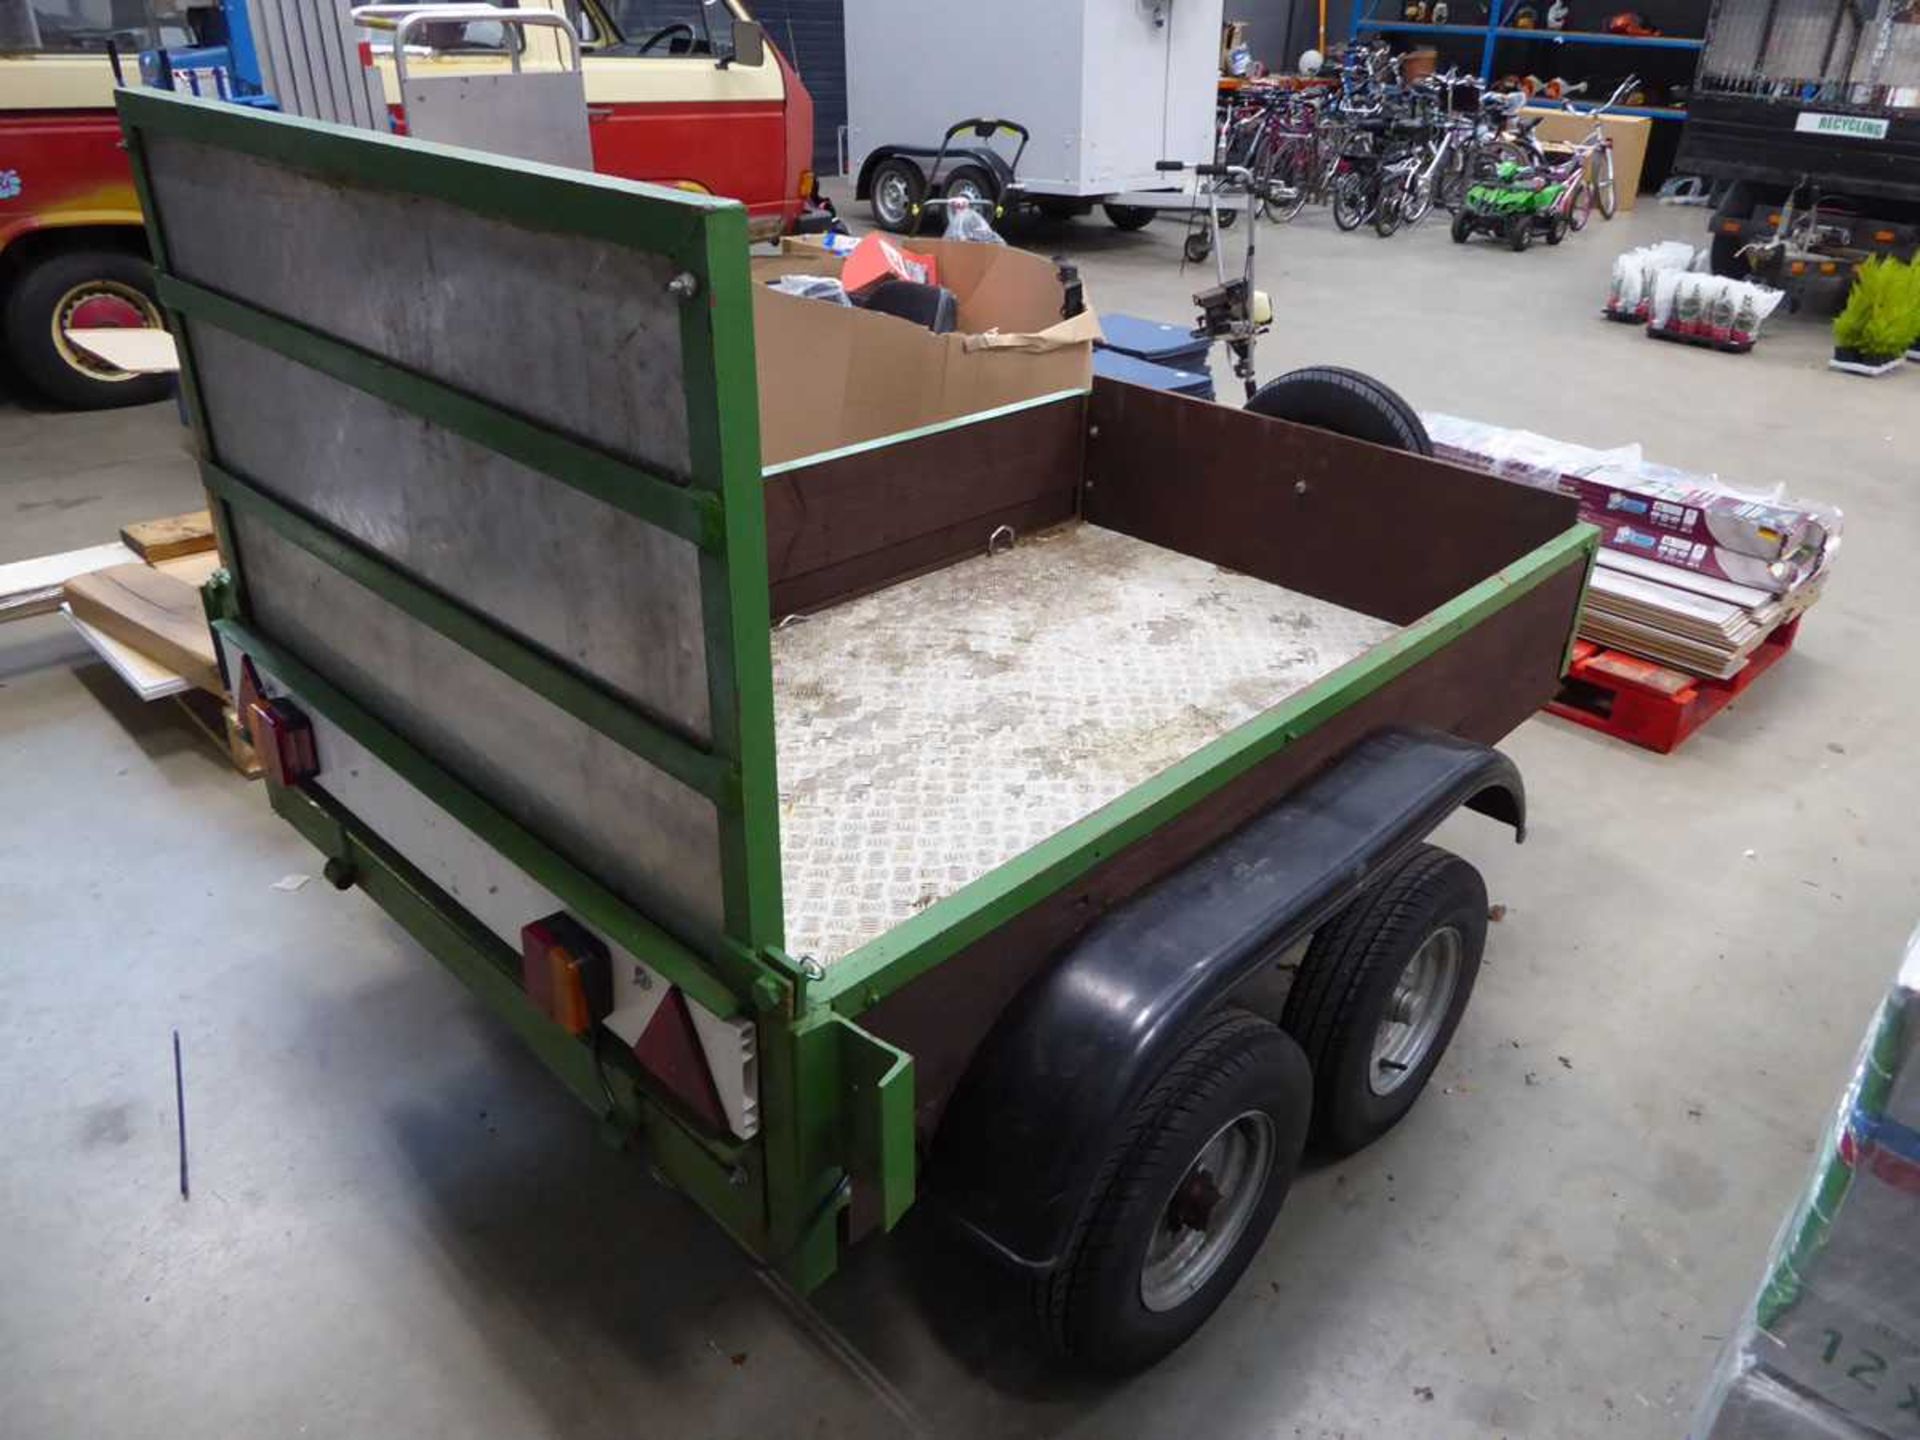 Double axle green metal and wood plant trailer with fold down backboard - Image 5 of 5